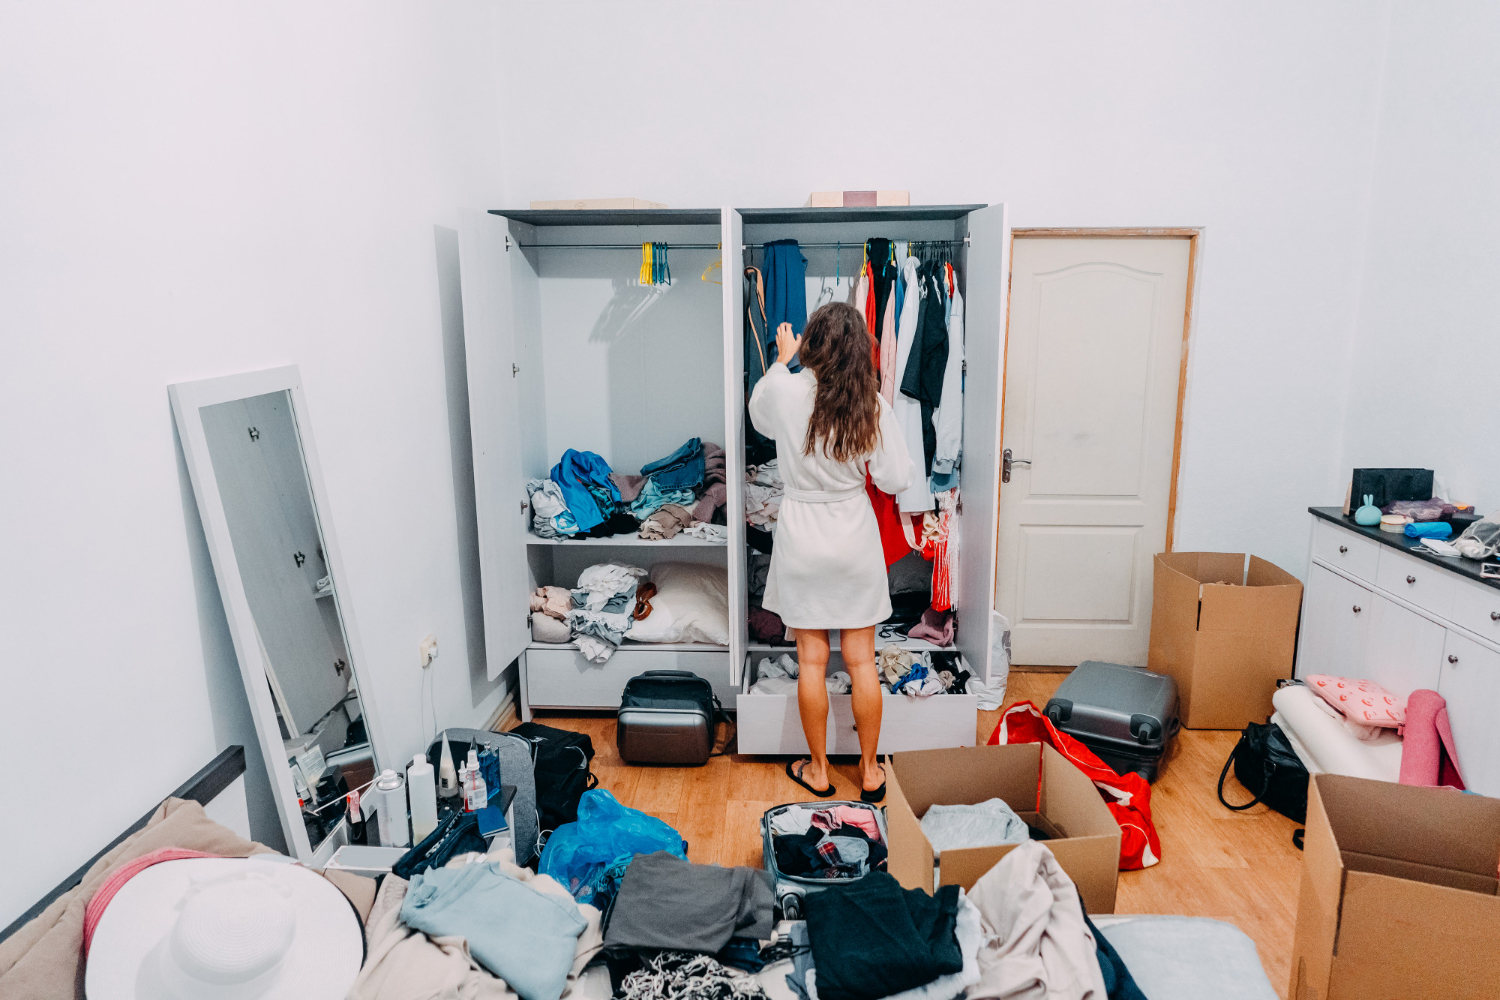 lady inside cluttered apartment